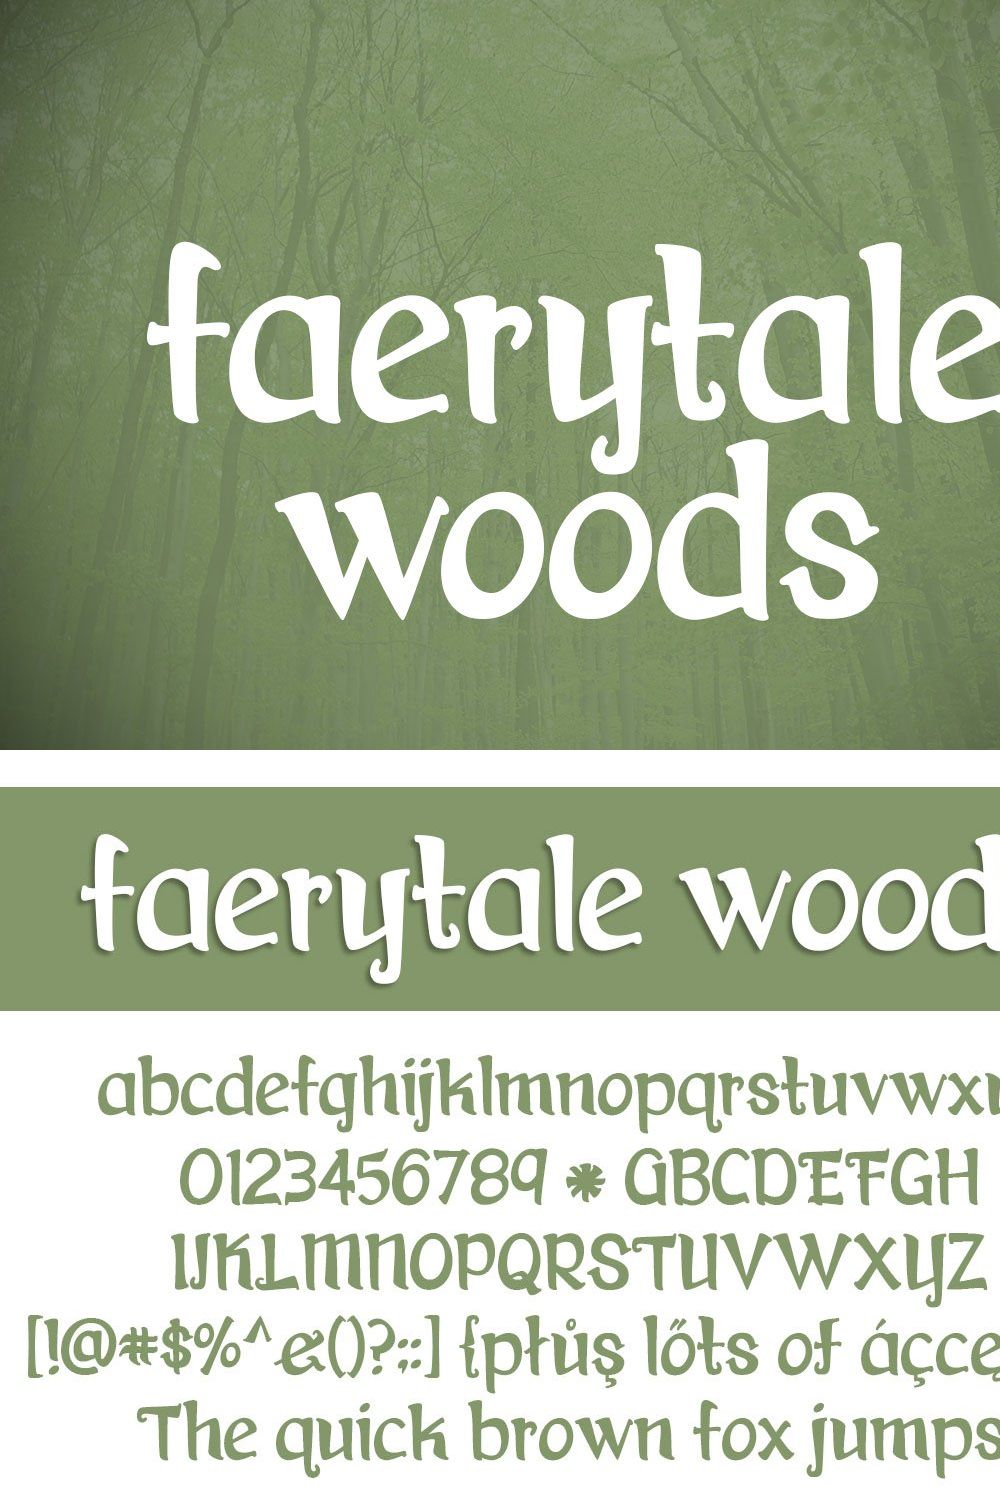 Faerytale Woods pinterest preview image.